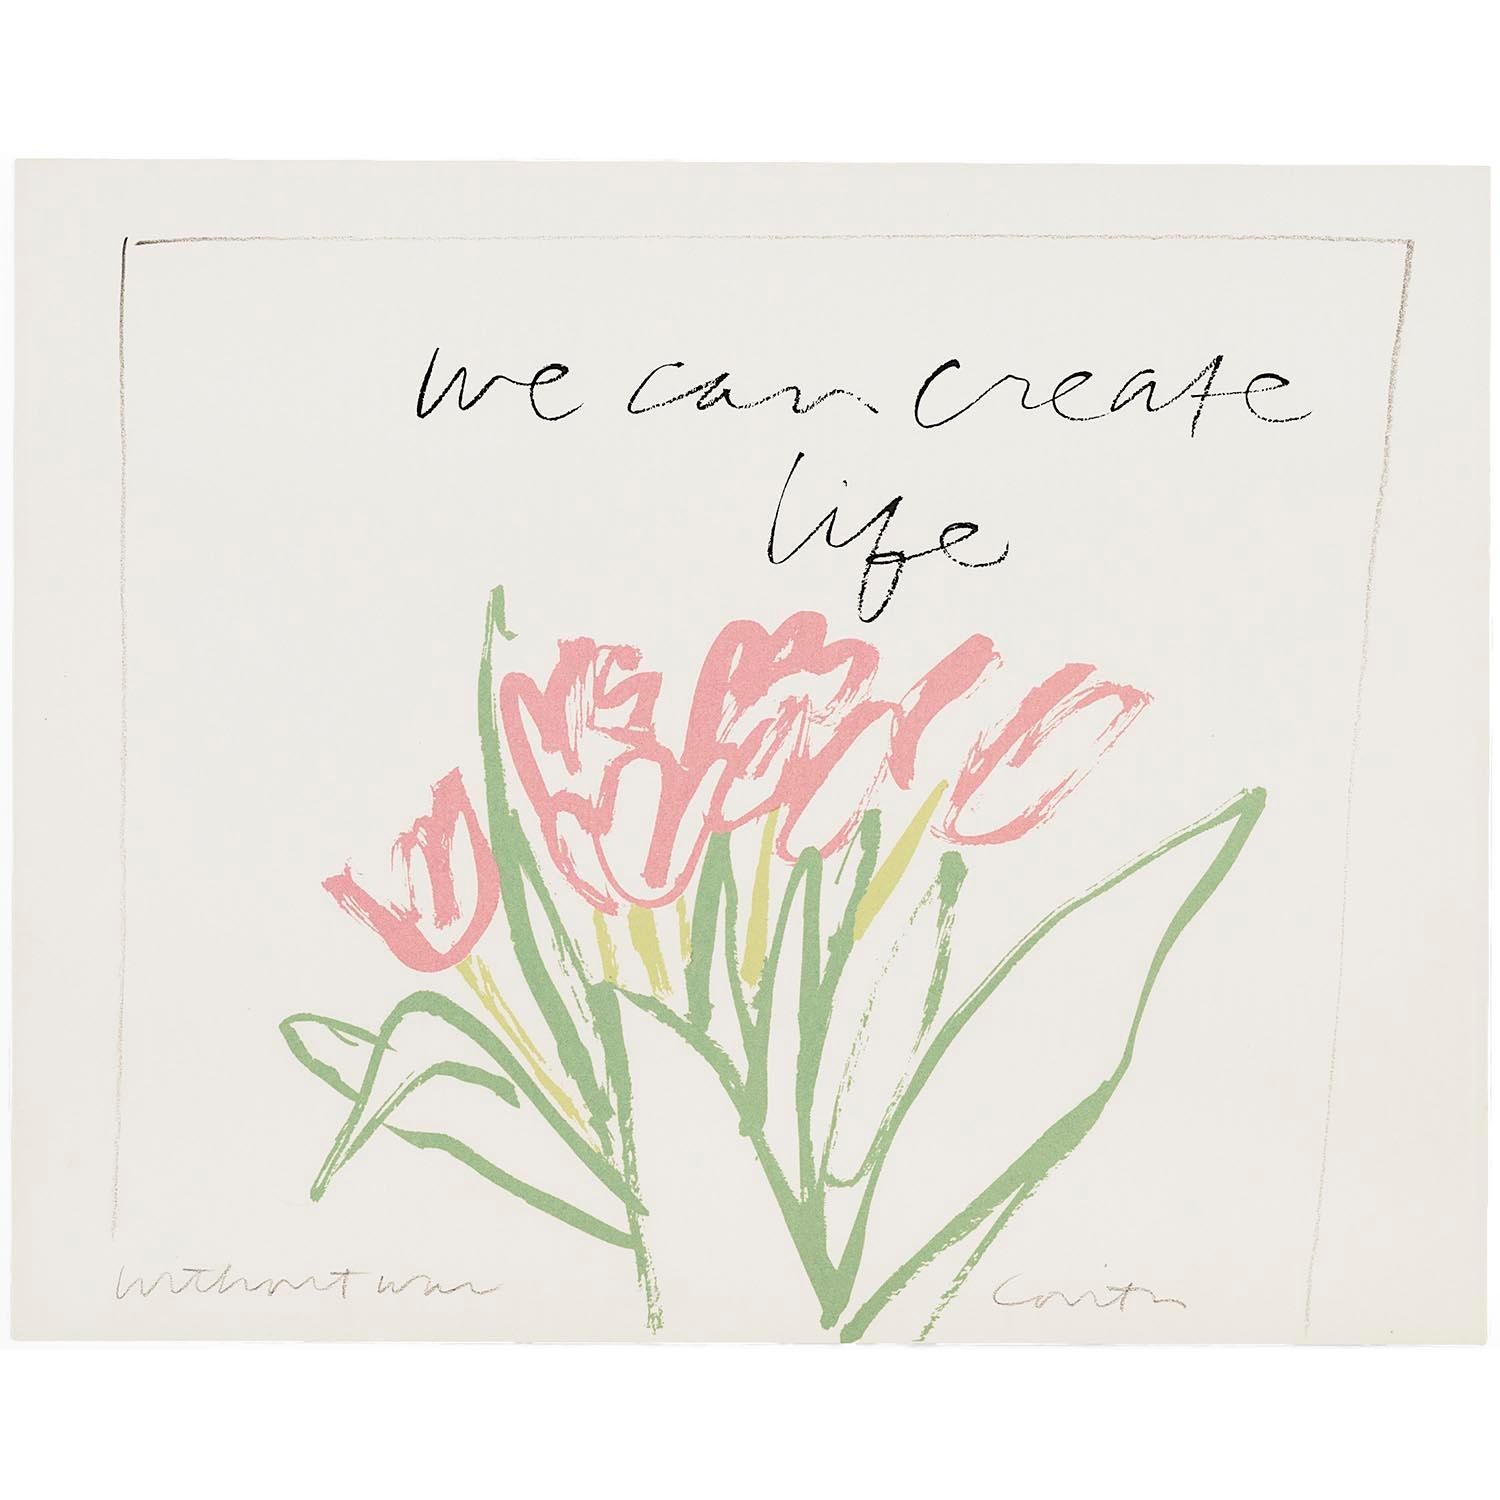 Mary (Sister Corita) Corita Kent 
We Can Create Life Without War (INV# NP4057)
serigraph print 
image: 16 x 20"
archive id: 84 -05
1984
signed
edition of 200
Rare and exceptional condition


